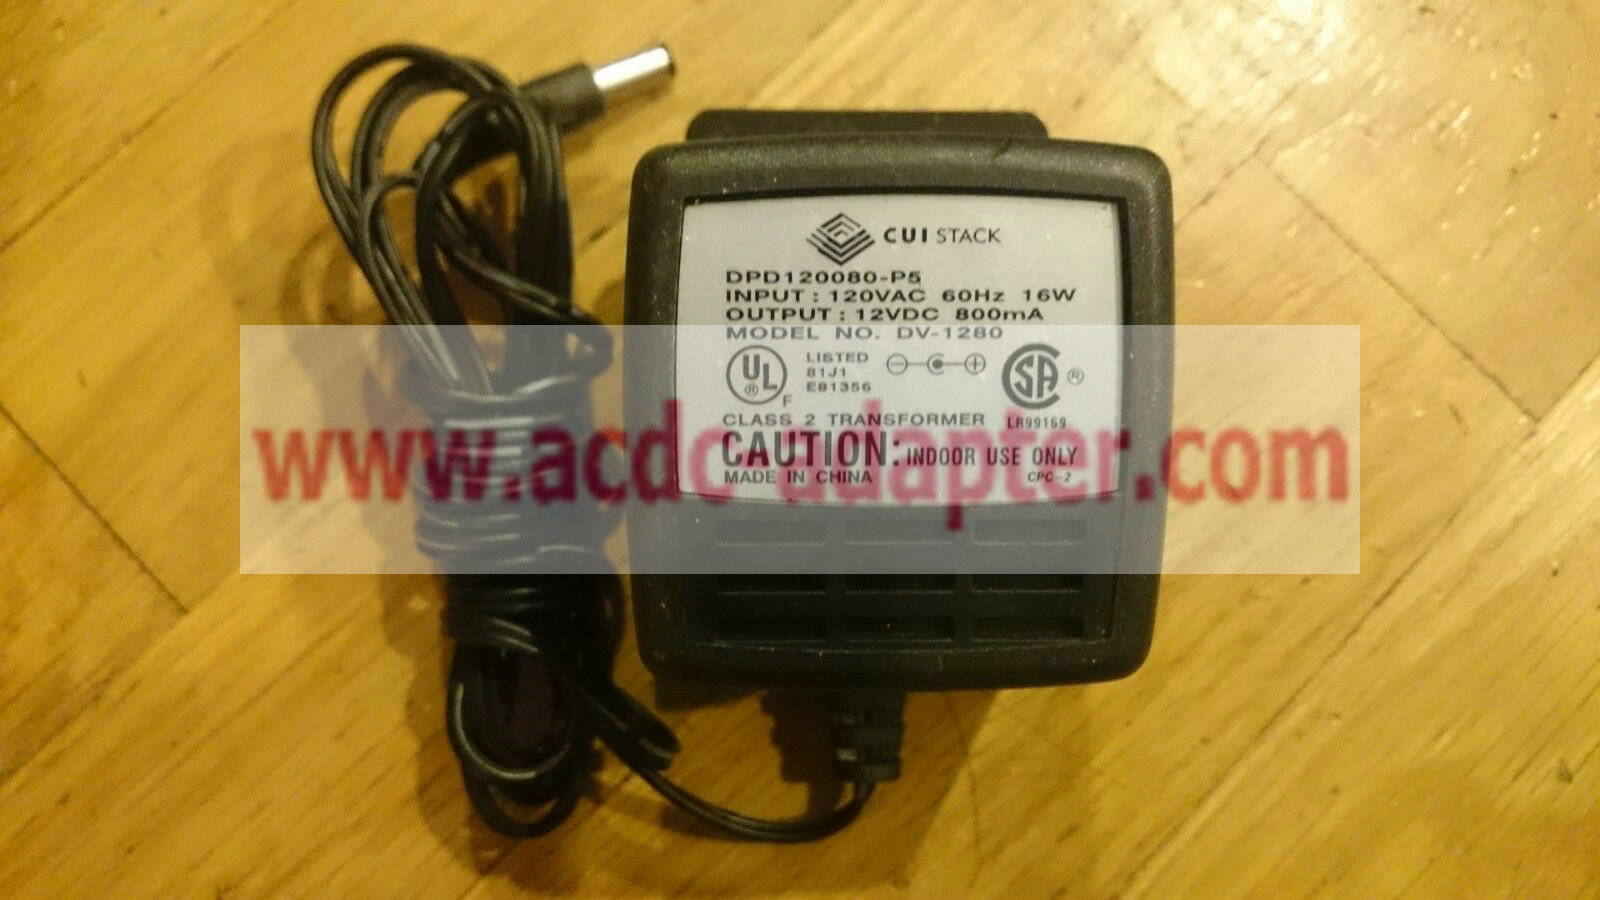 New 12VDC AC Adapter for CUI Stack DV-1280 DPD120080-P5 12VDC Power Supply Cord